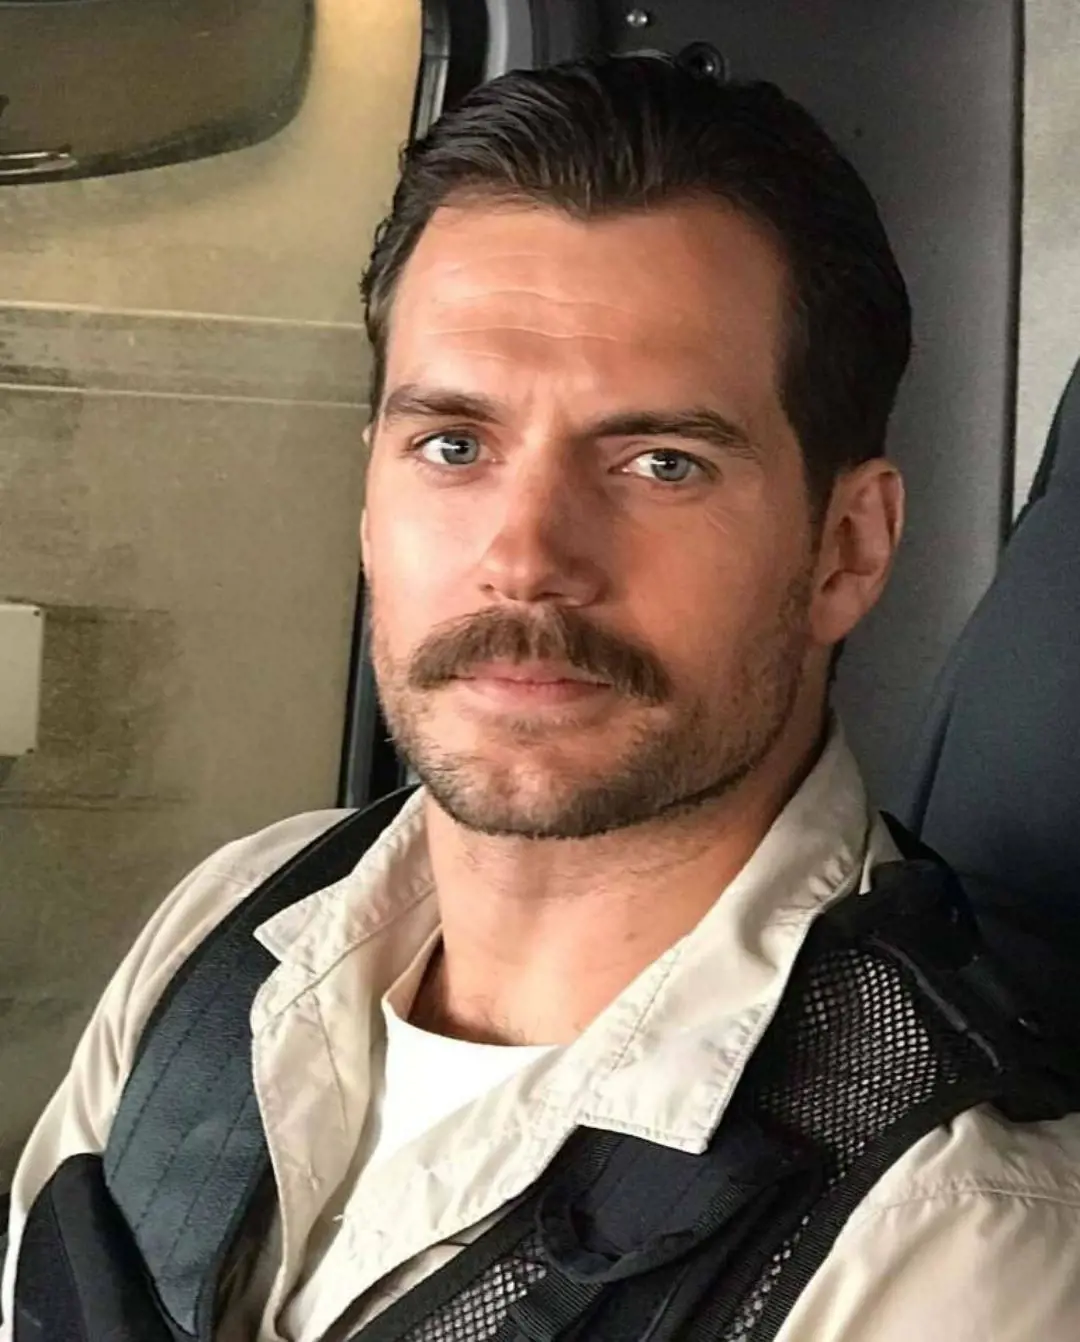 Cavill stole the show with his iconic Beardstache in the spy action thriller directed by Christopher McQuarrie